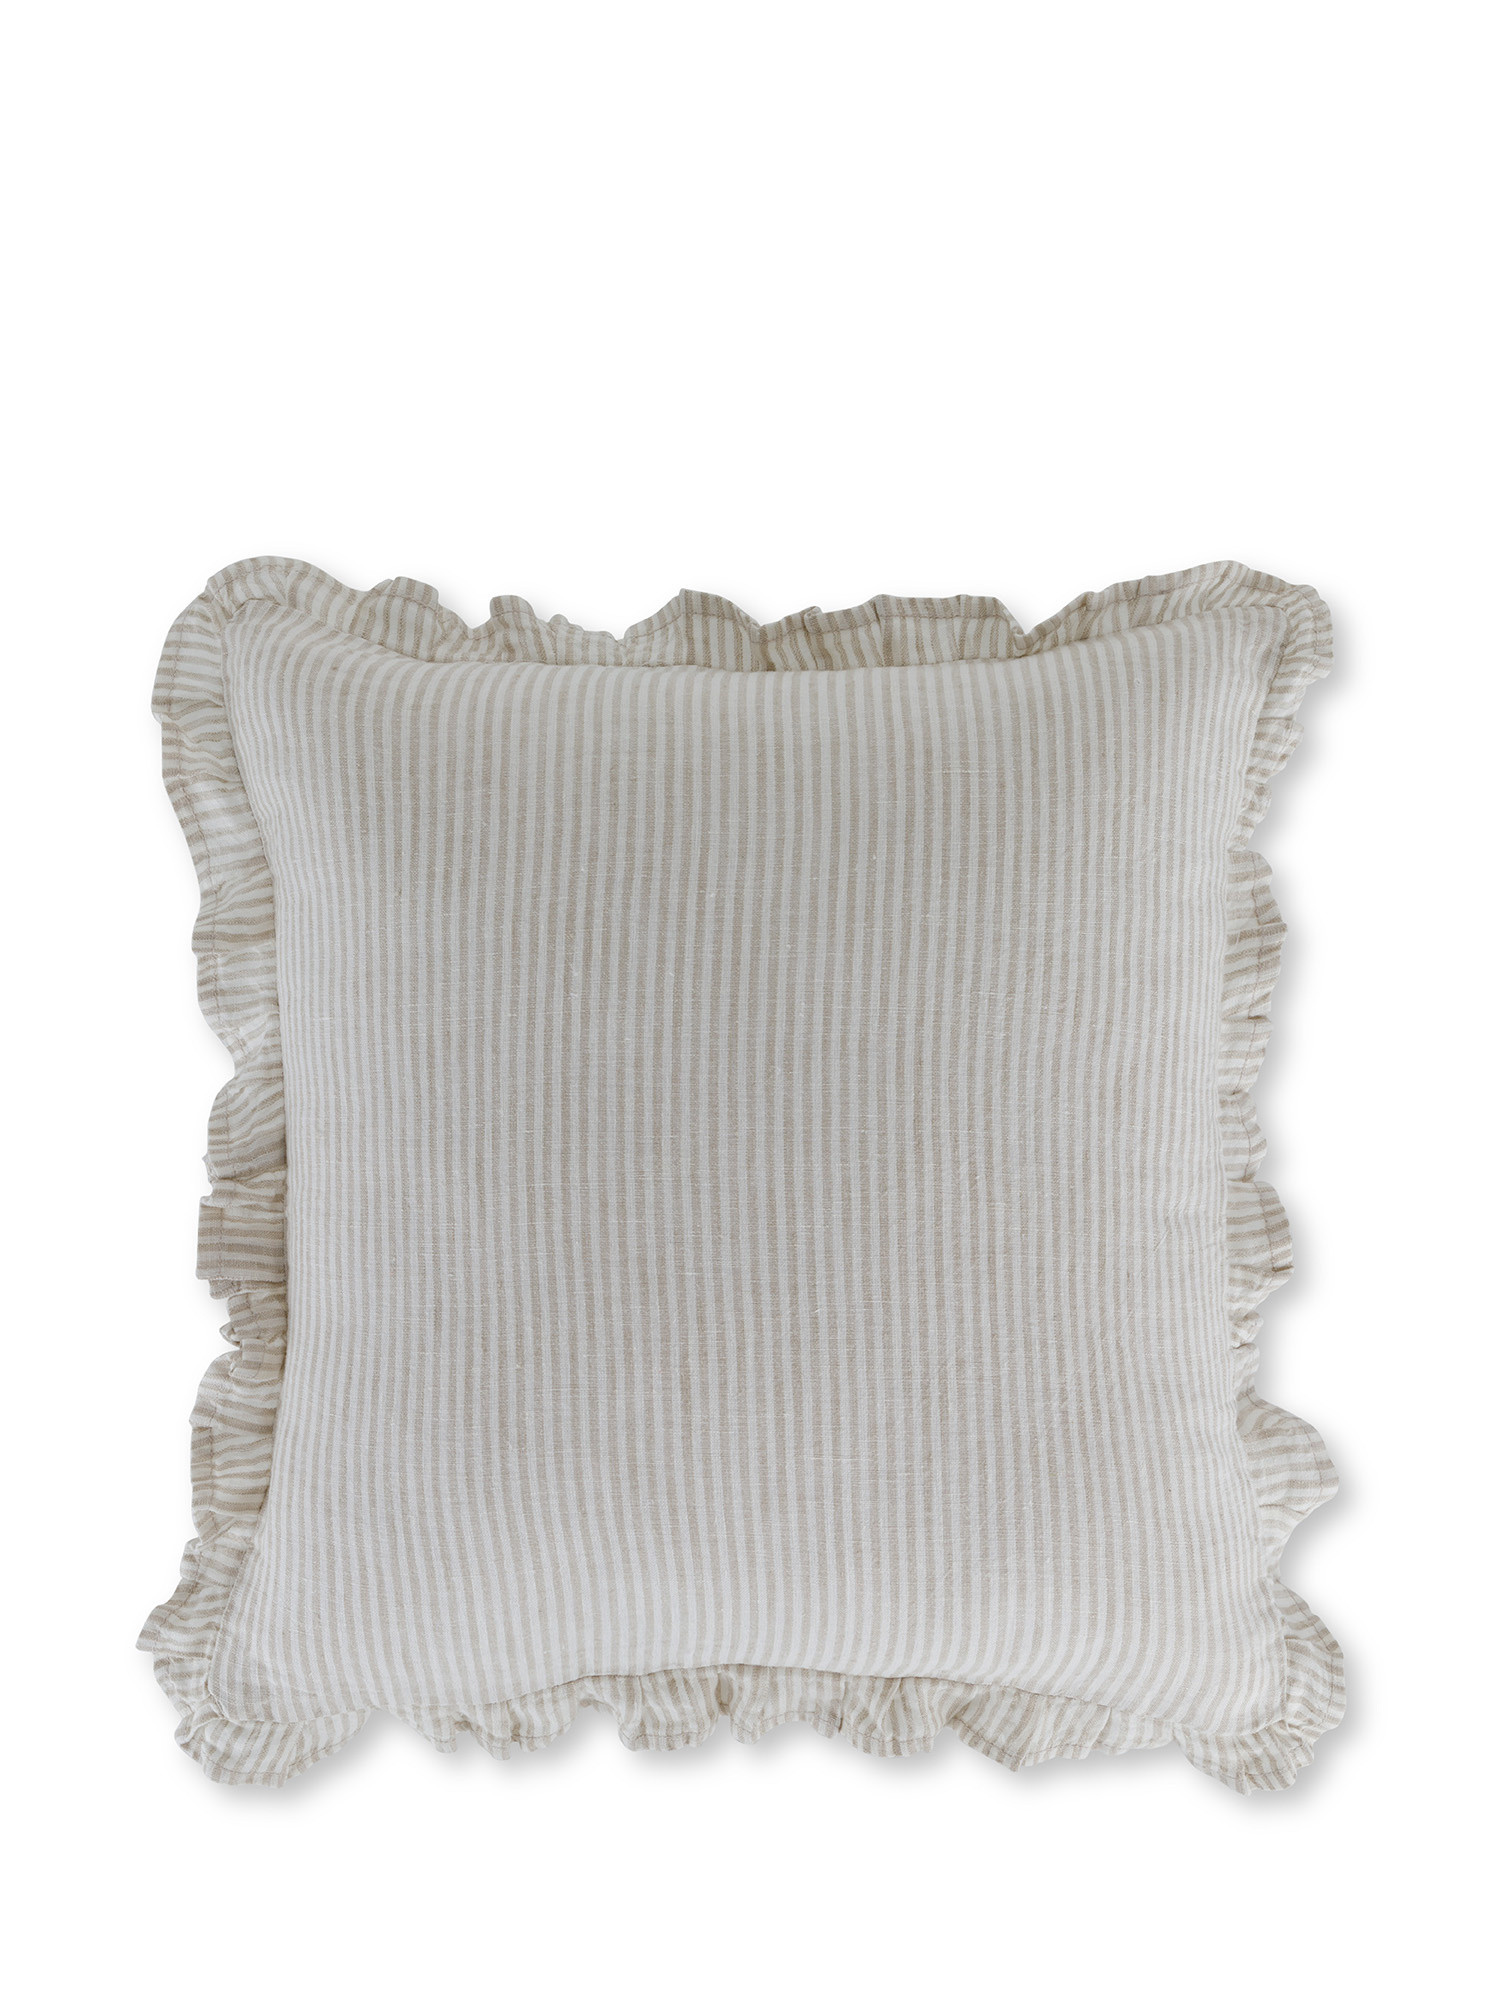 Striped cushion in pure linen 40x40 cm, Beige, large image number 0